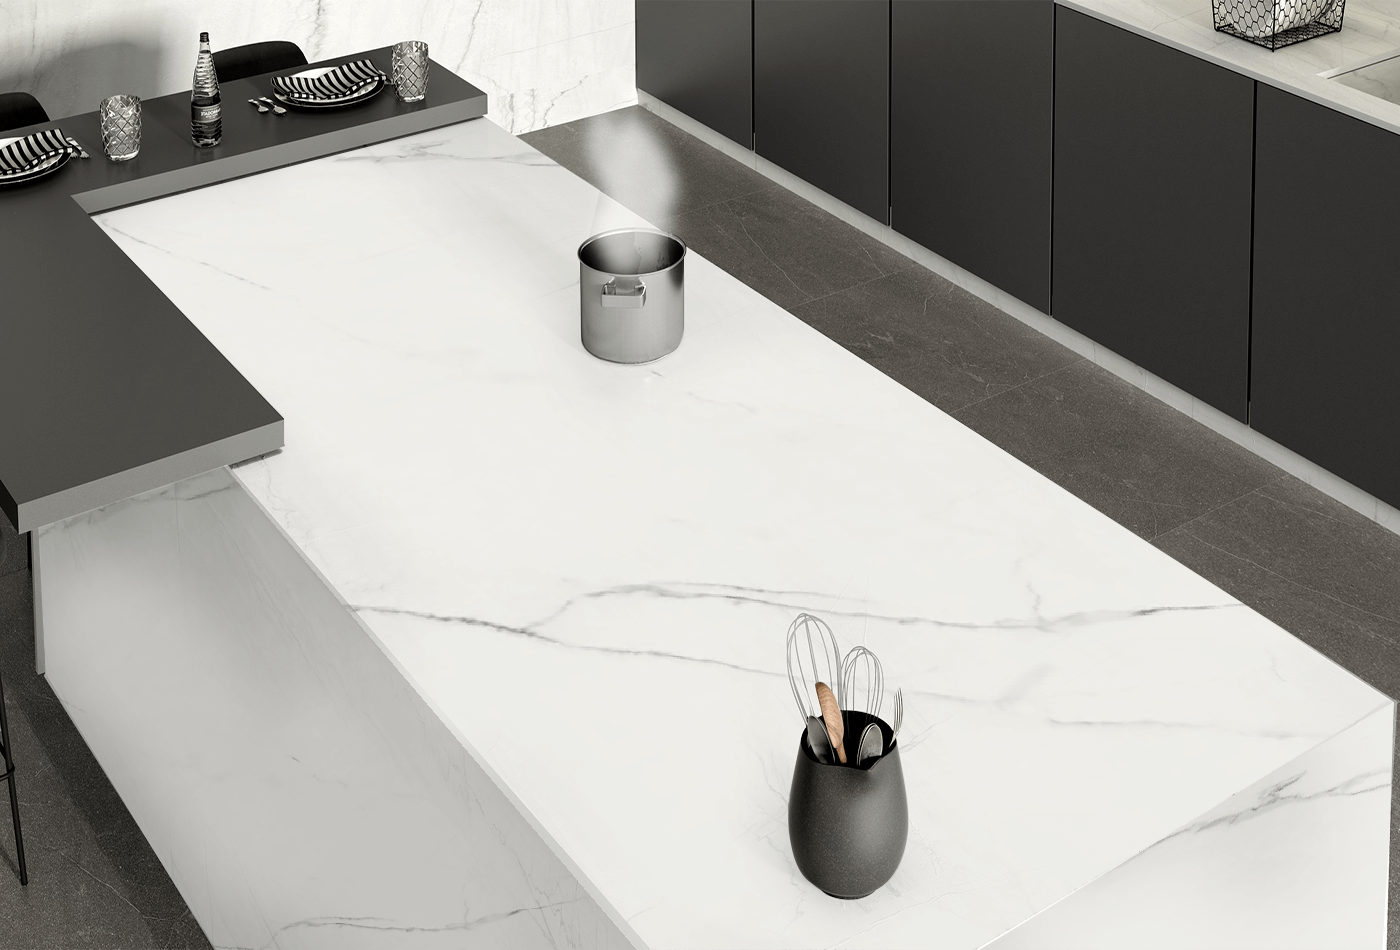 Introducing Technology into Your Marble Kitchen